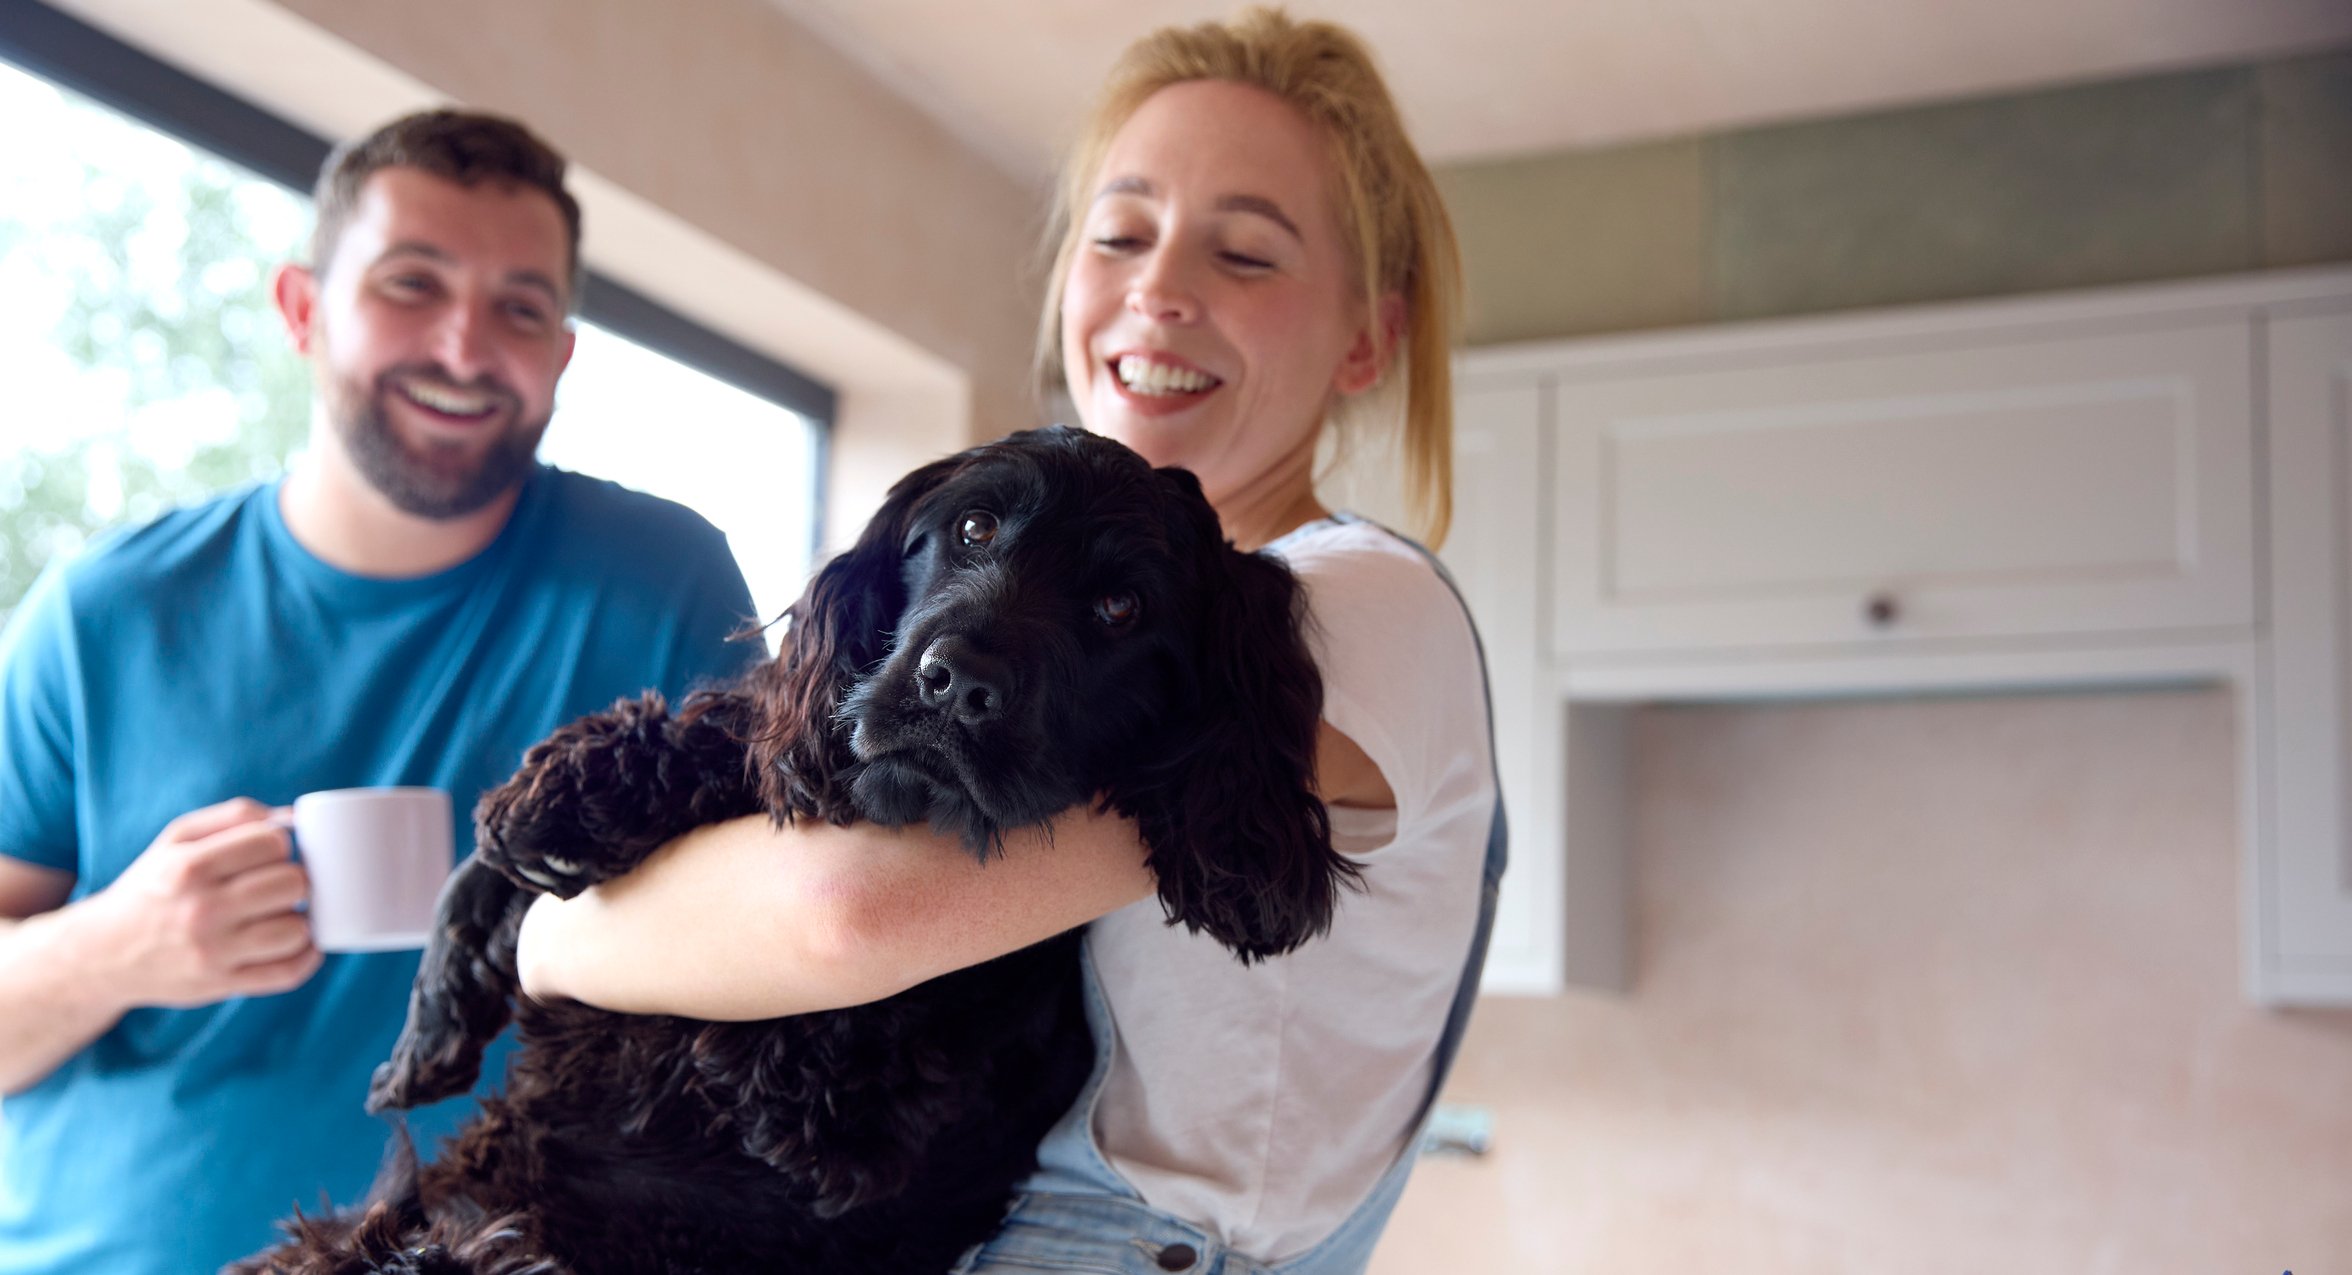 Couple with spaniel dog in their arms